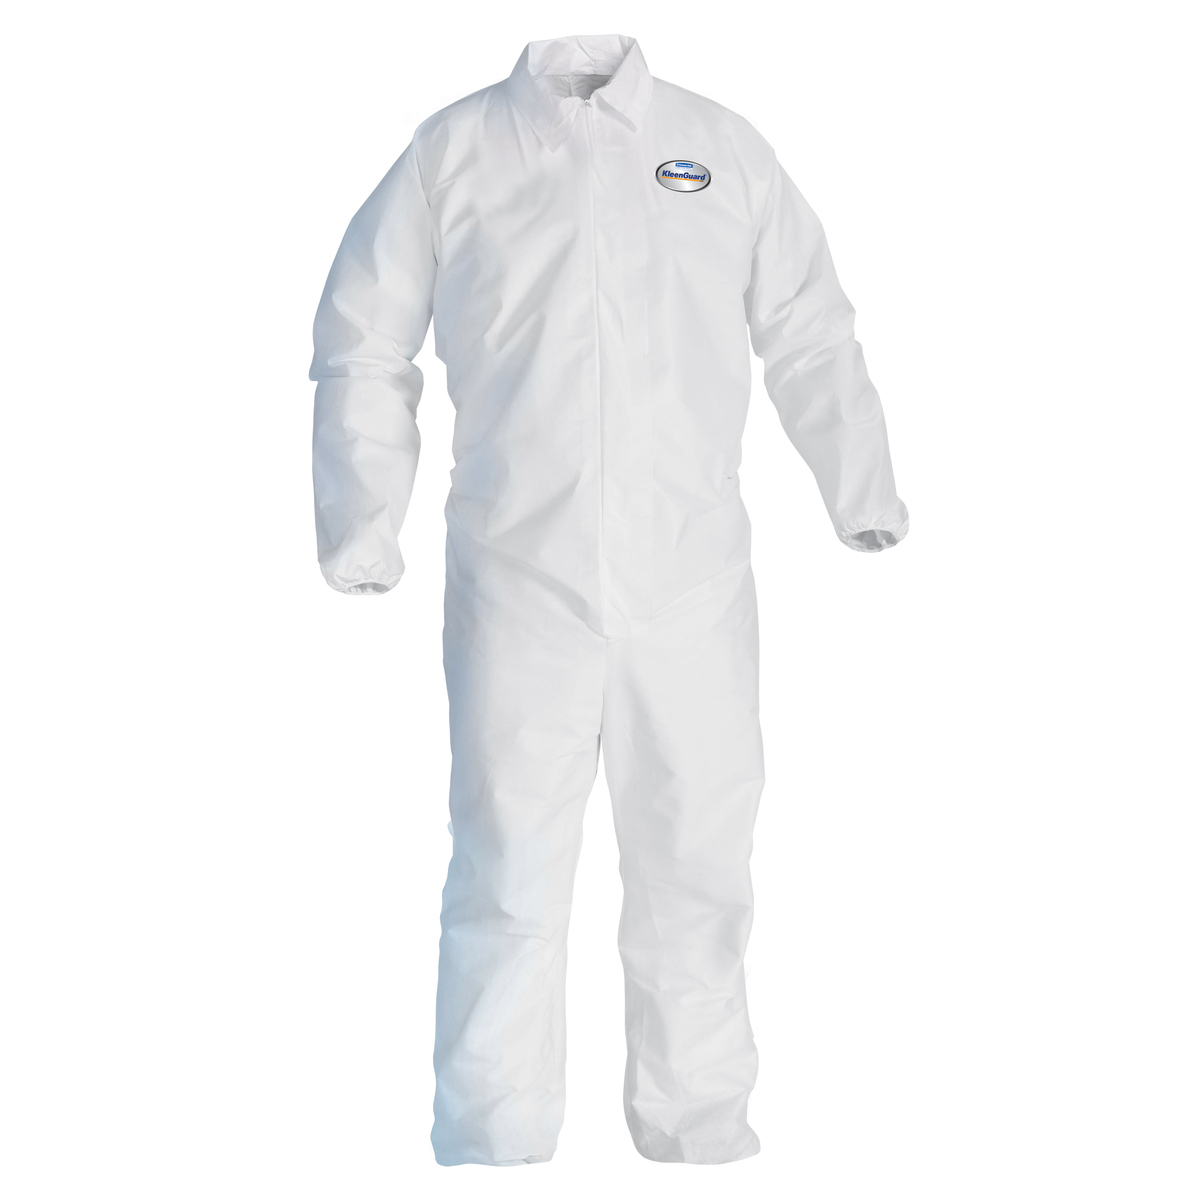 Kimberly-Clark Professional™ X-Large White KleenGuard™ A40 Film Laminate Disposable Coveralls (Availability restrictions apply.)